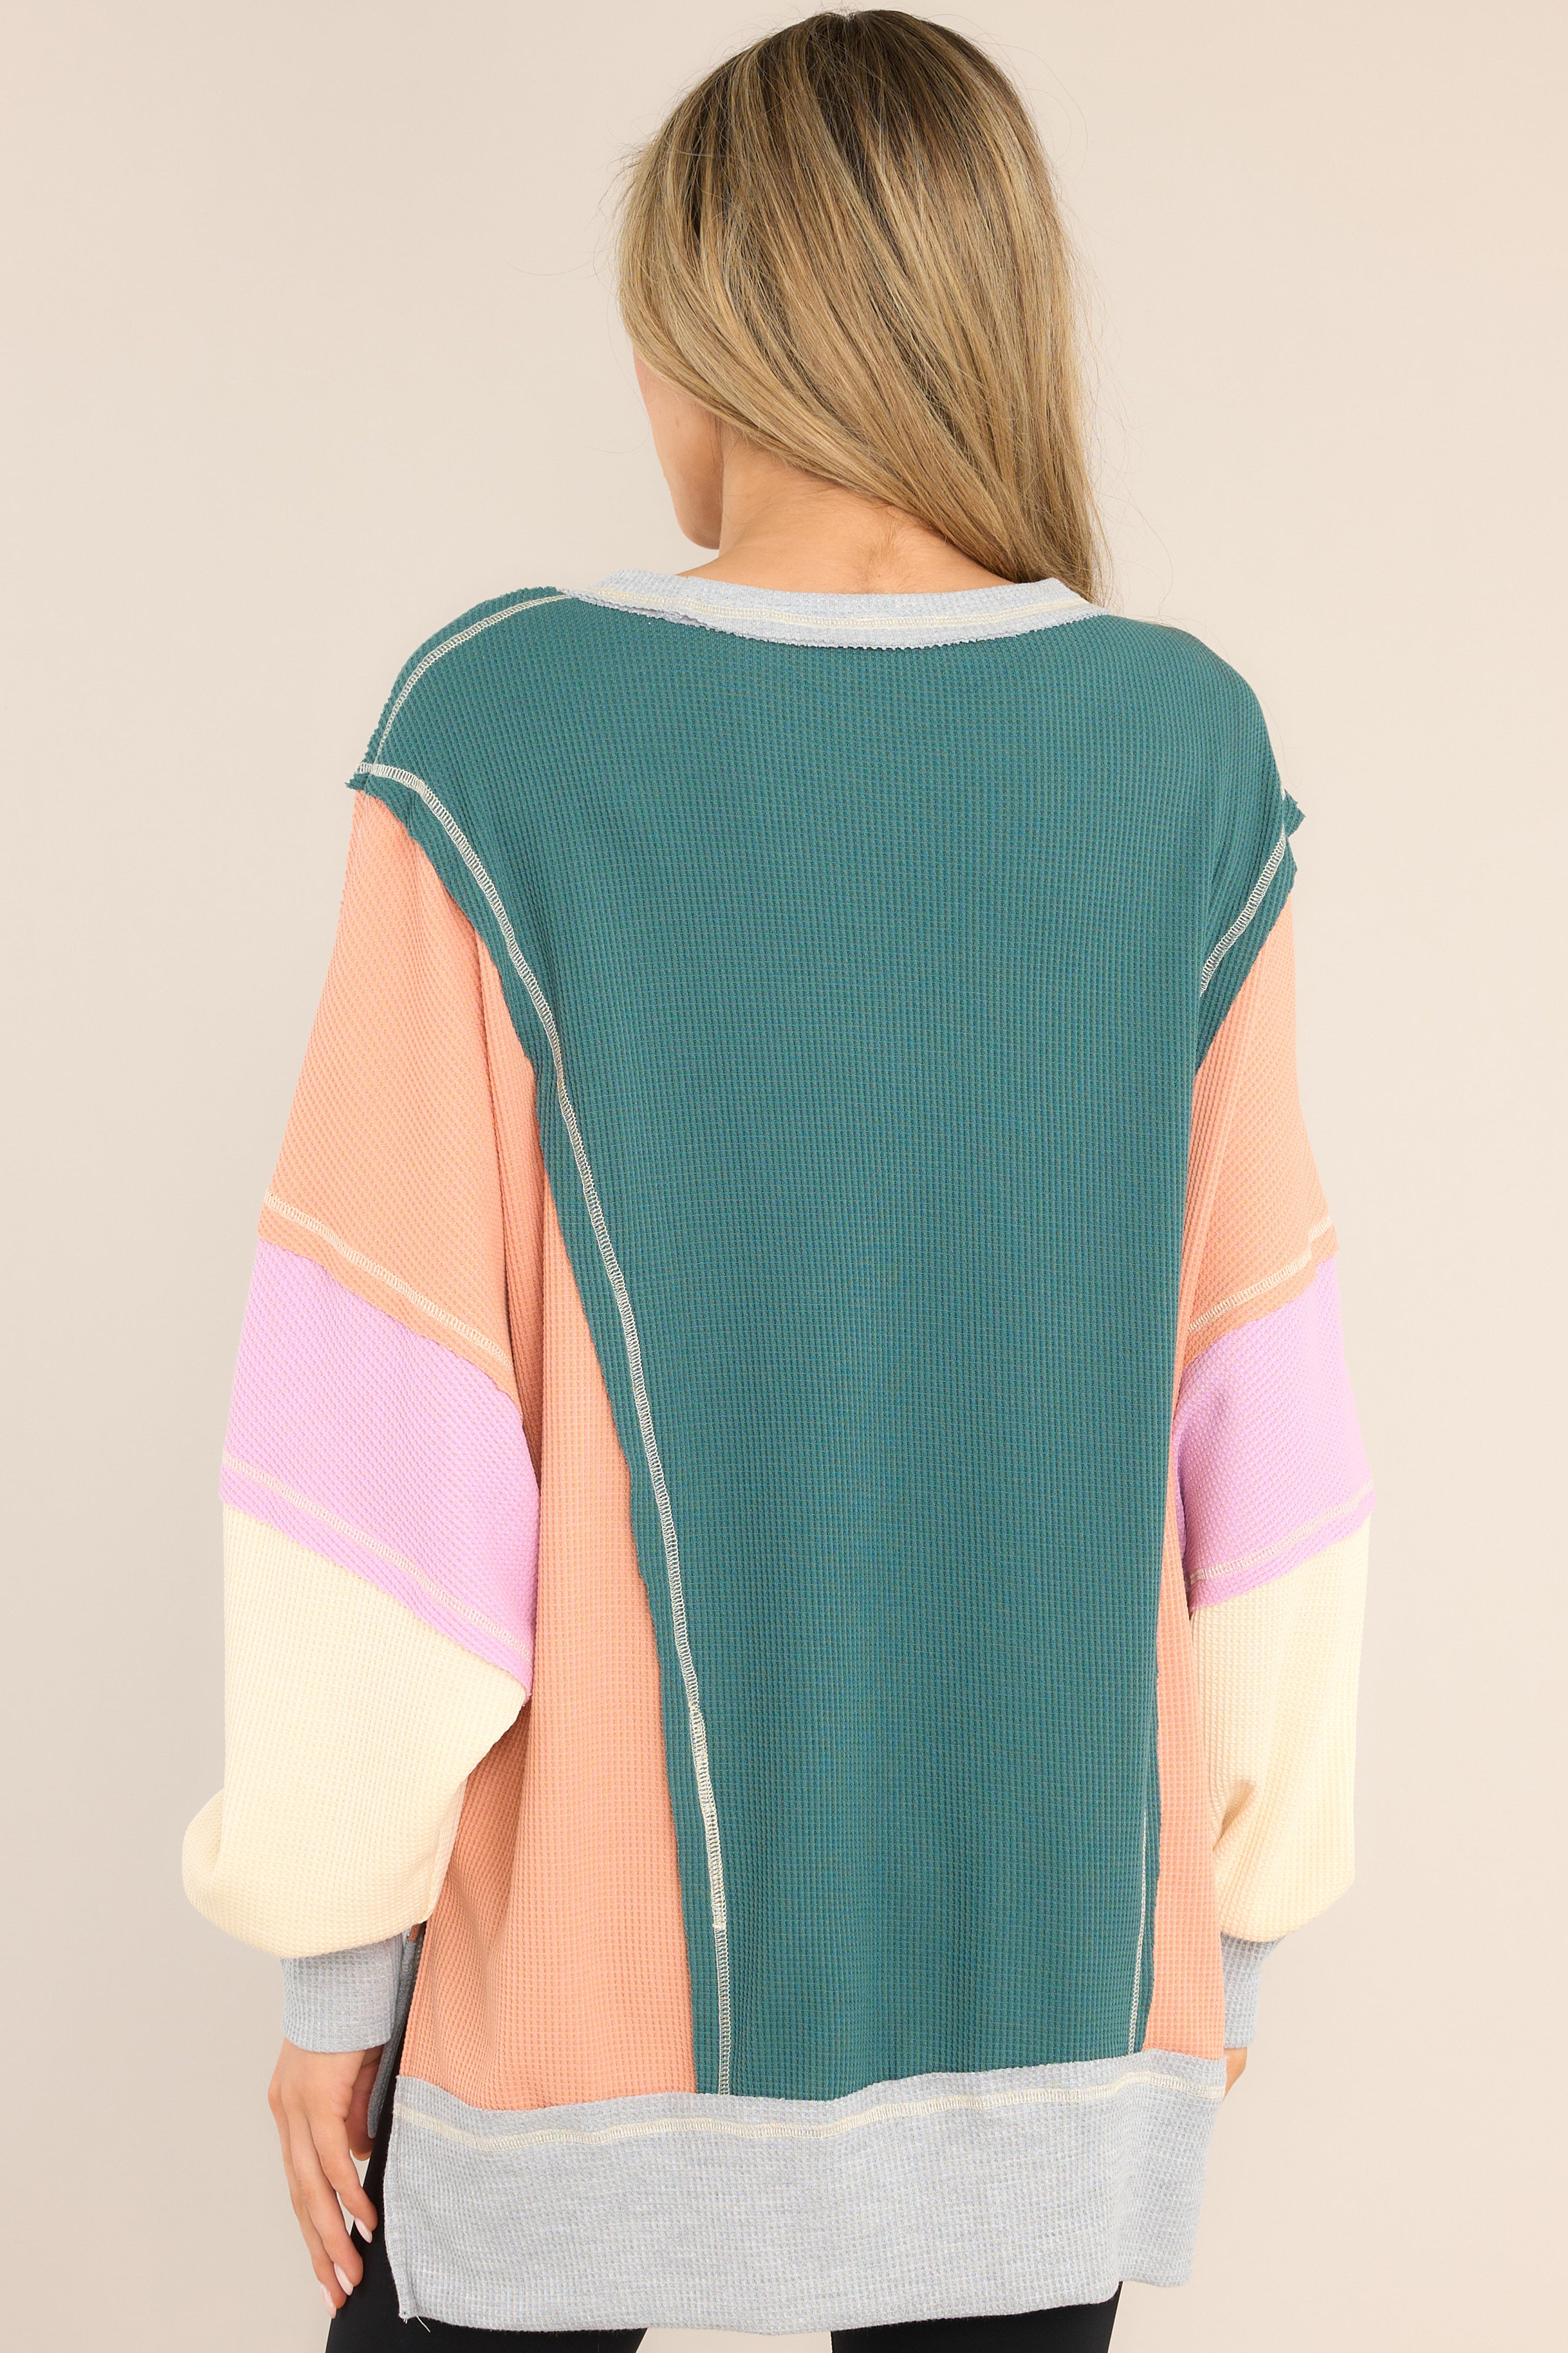 Back view of  this top that features a crew neckline, dropped shoulders, front pockets, a waffle knit material, cuffed sleeves, and a high-low split hemline.